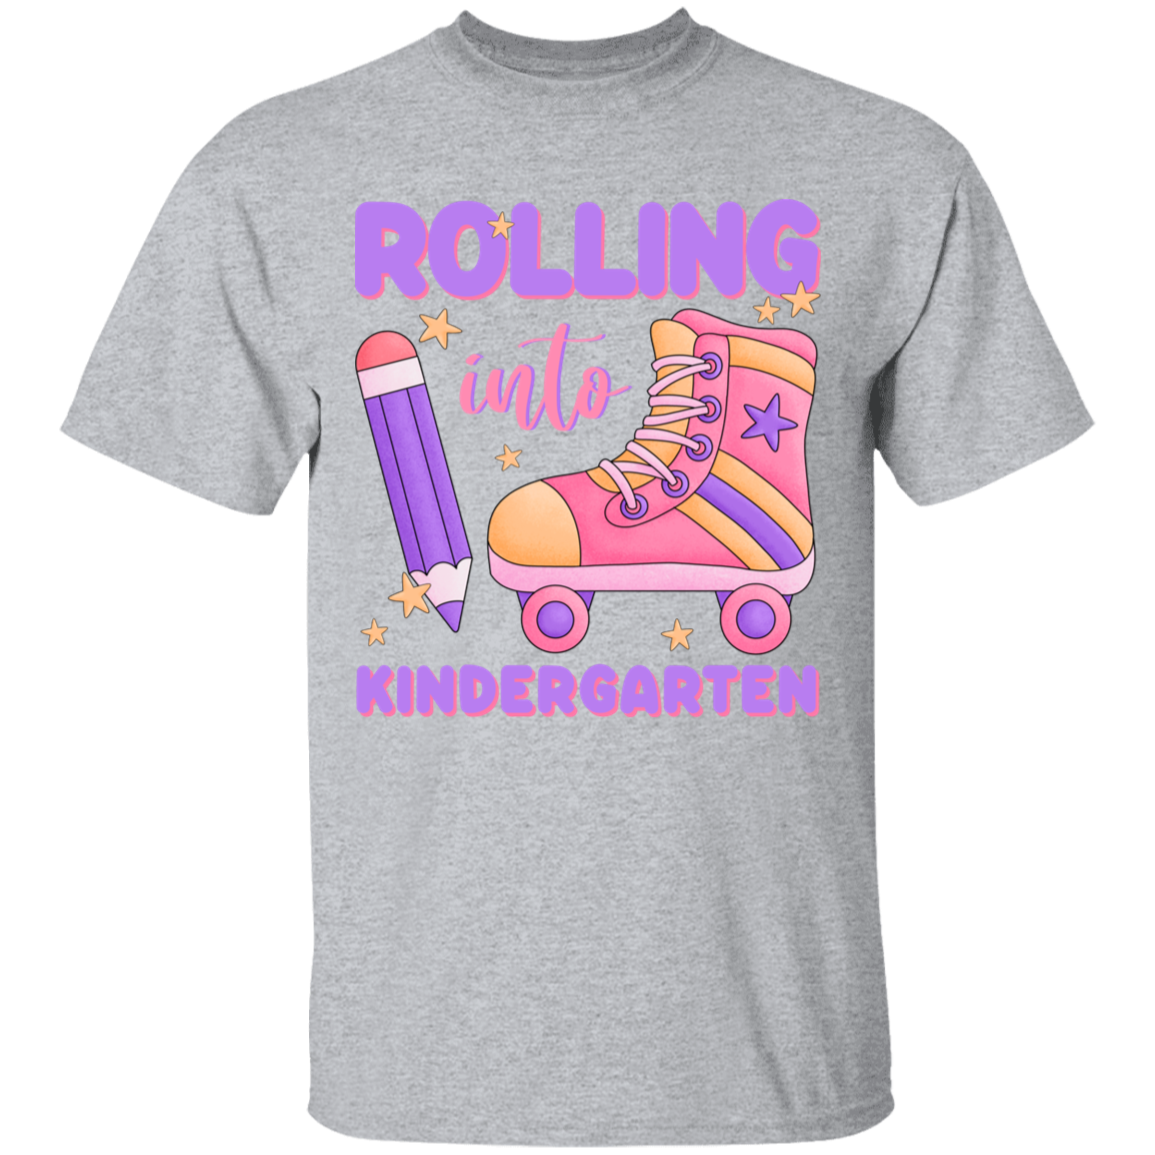 Rolling Into Kindergarten Youth Cotton T-Shirt